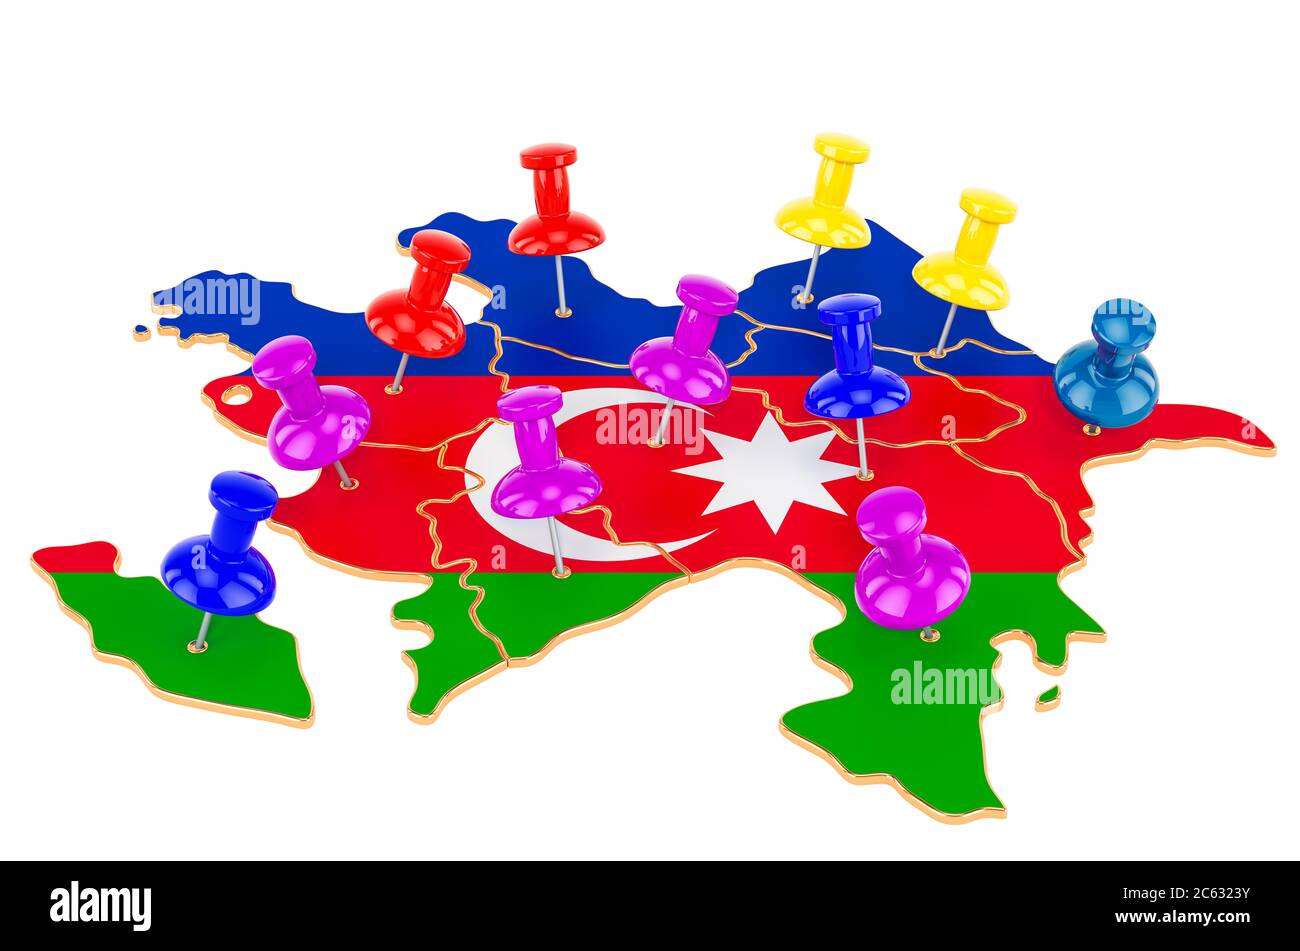 Map of Azerbaijan with colored push pins, 3D rendering isolated on white background Stock Photo